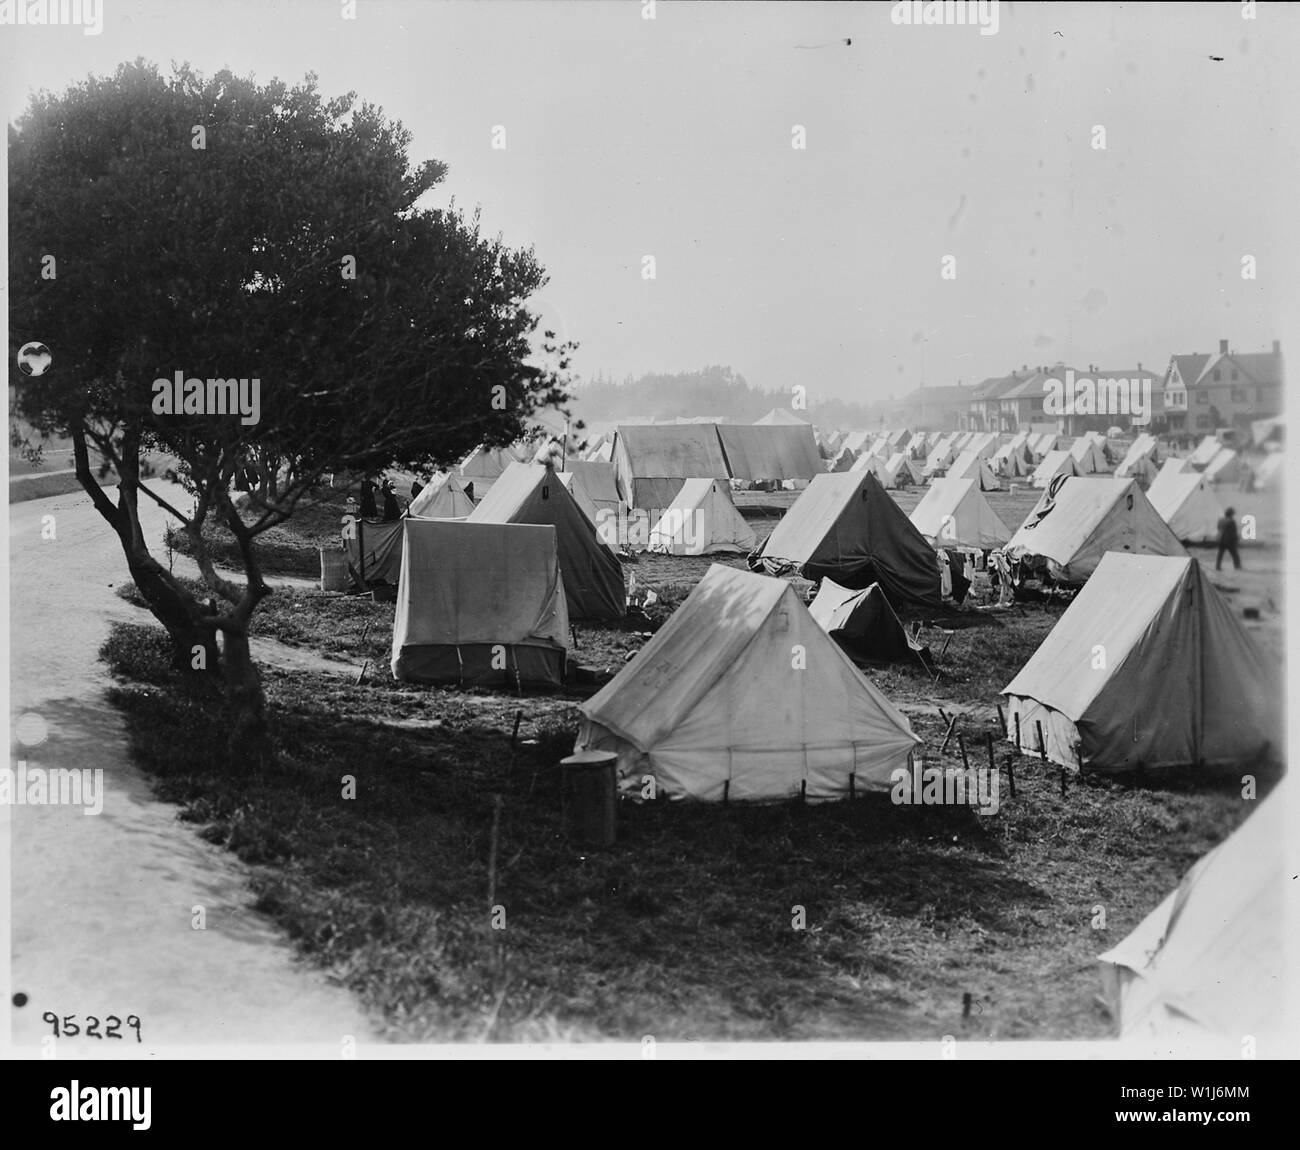 San Francisco Earthquake of 1906: A refugee camp in the area adjacent ...